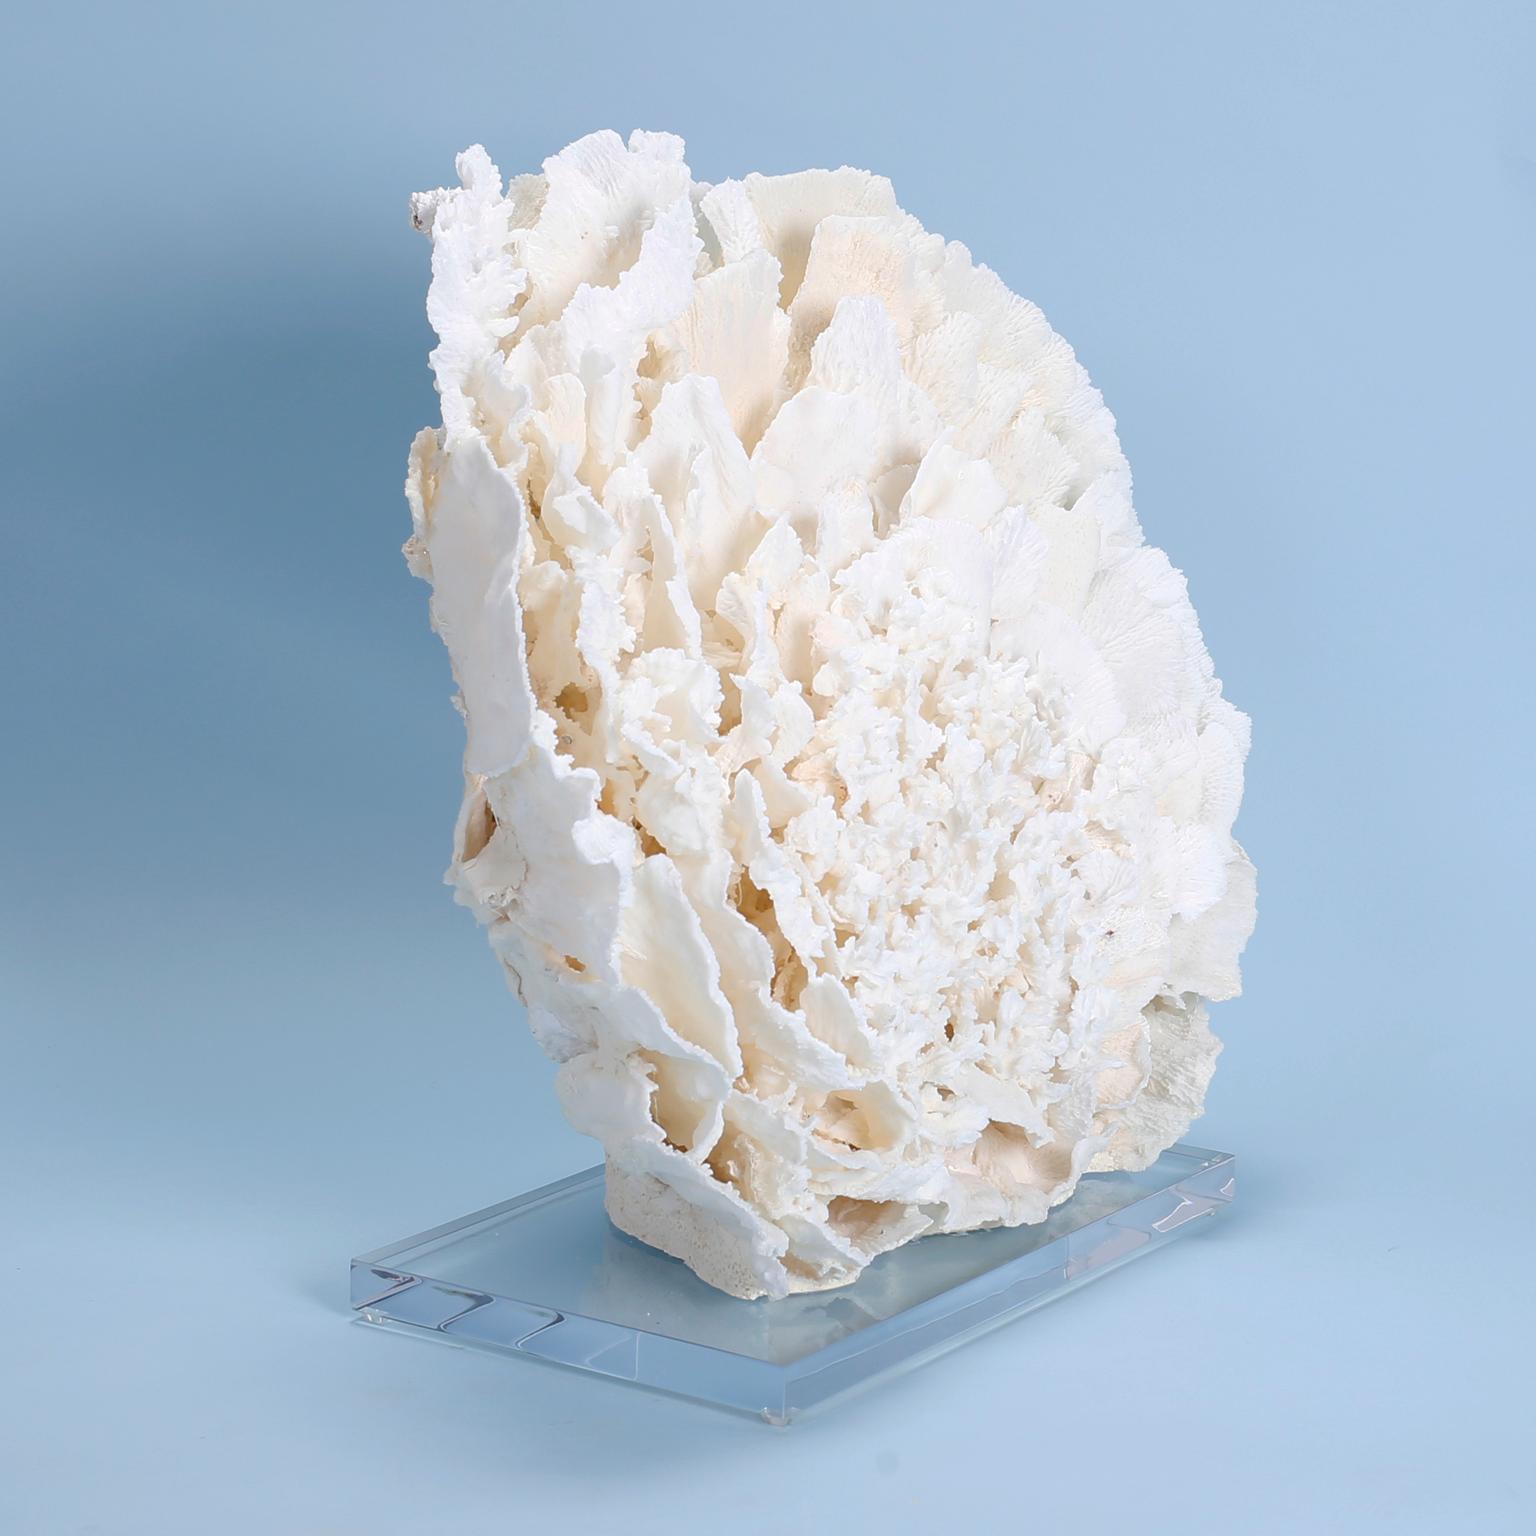 Large and impressive coral sculpture or assemblage designed and expertly crafted by F. S. Henemader from authentic coral with its bleached white color and sea inspired texture. Presented on a Lucite base to enhance the sculptural elements. Coral